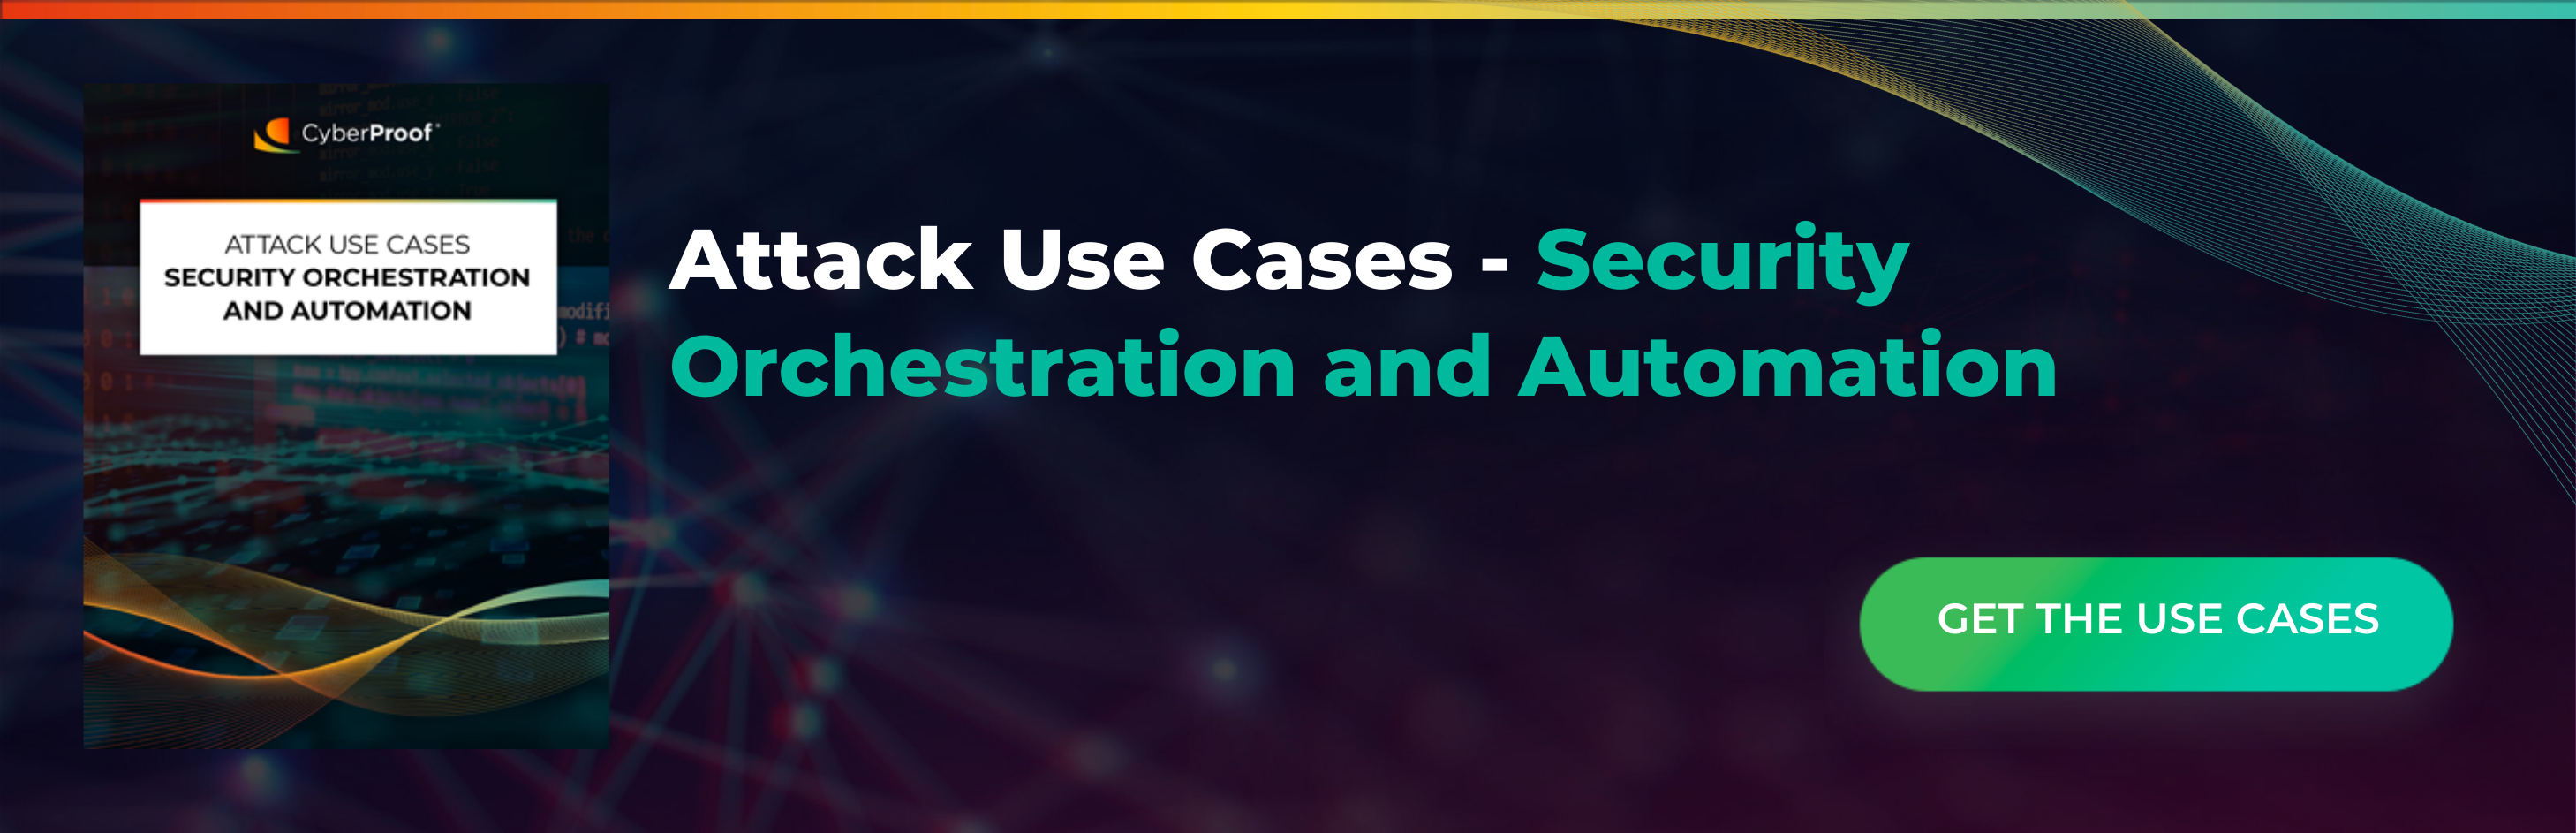 Attack Use Cases